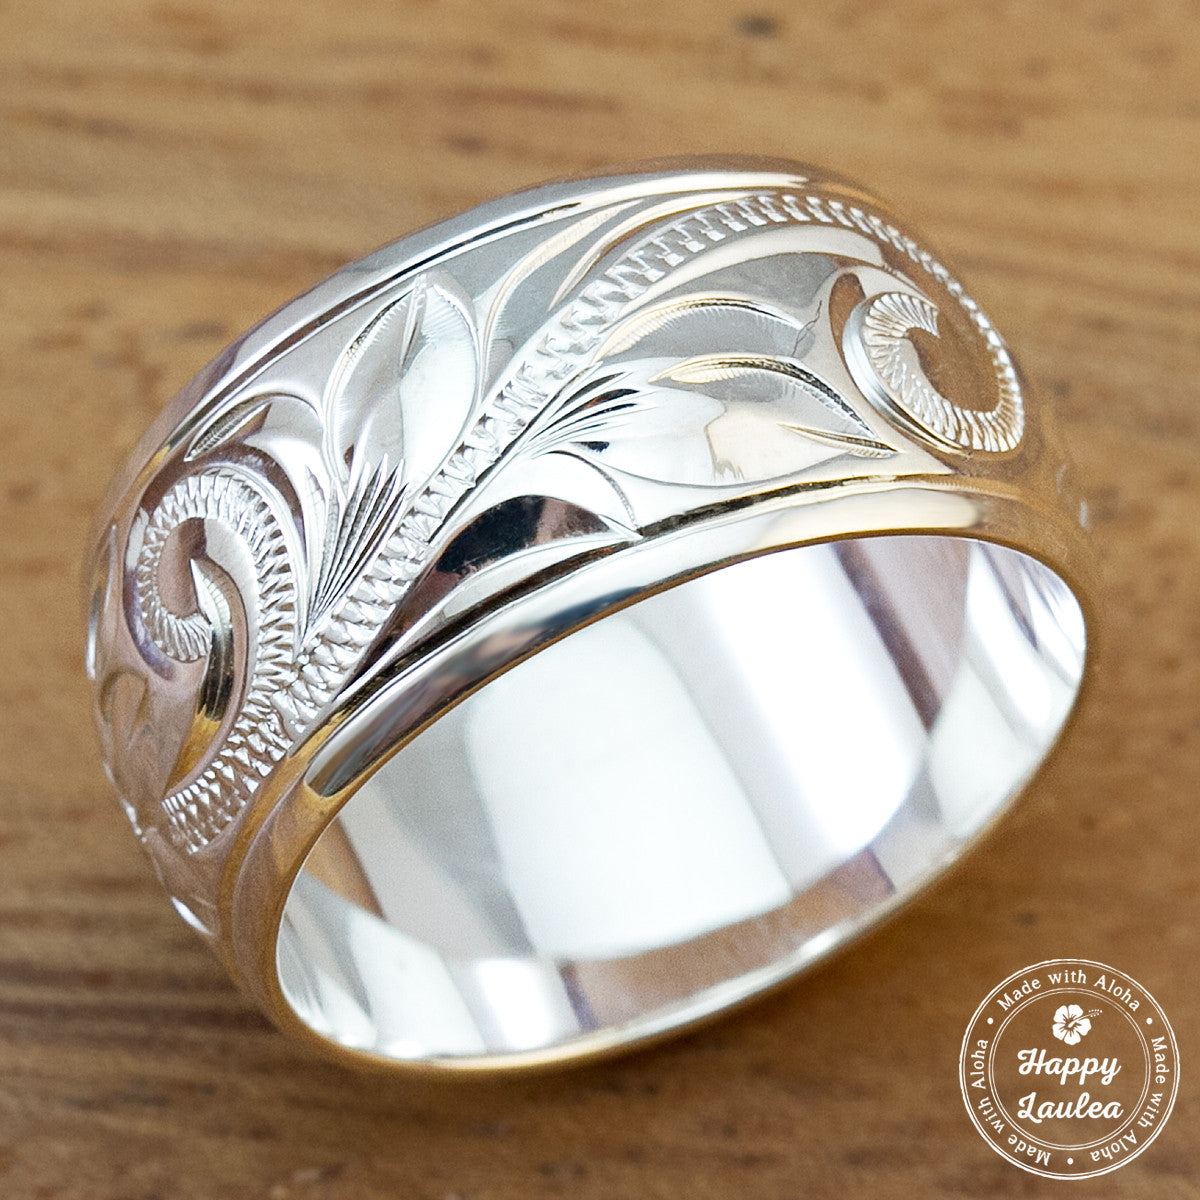 925 Sterling Silver Hand Engraved Old English Design Ring with Polished Edges - 10mm, Dome Shape, Standard Fitment